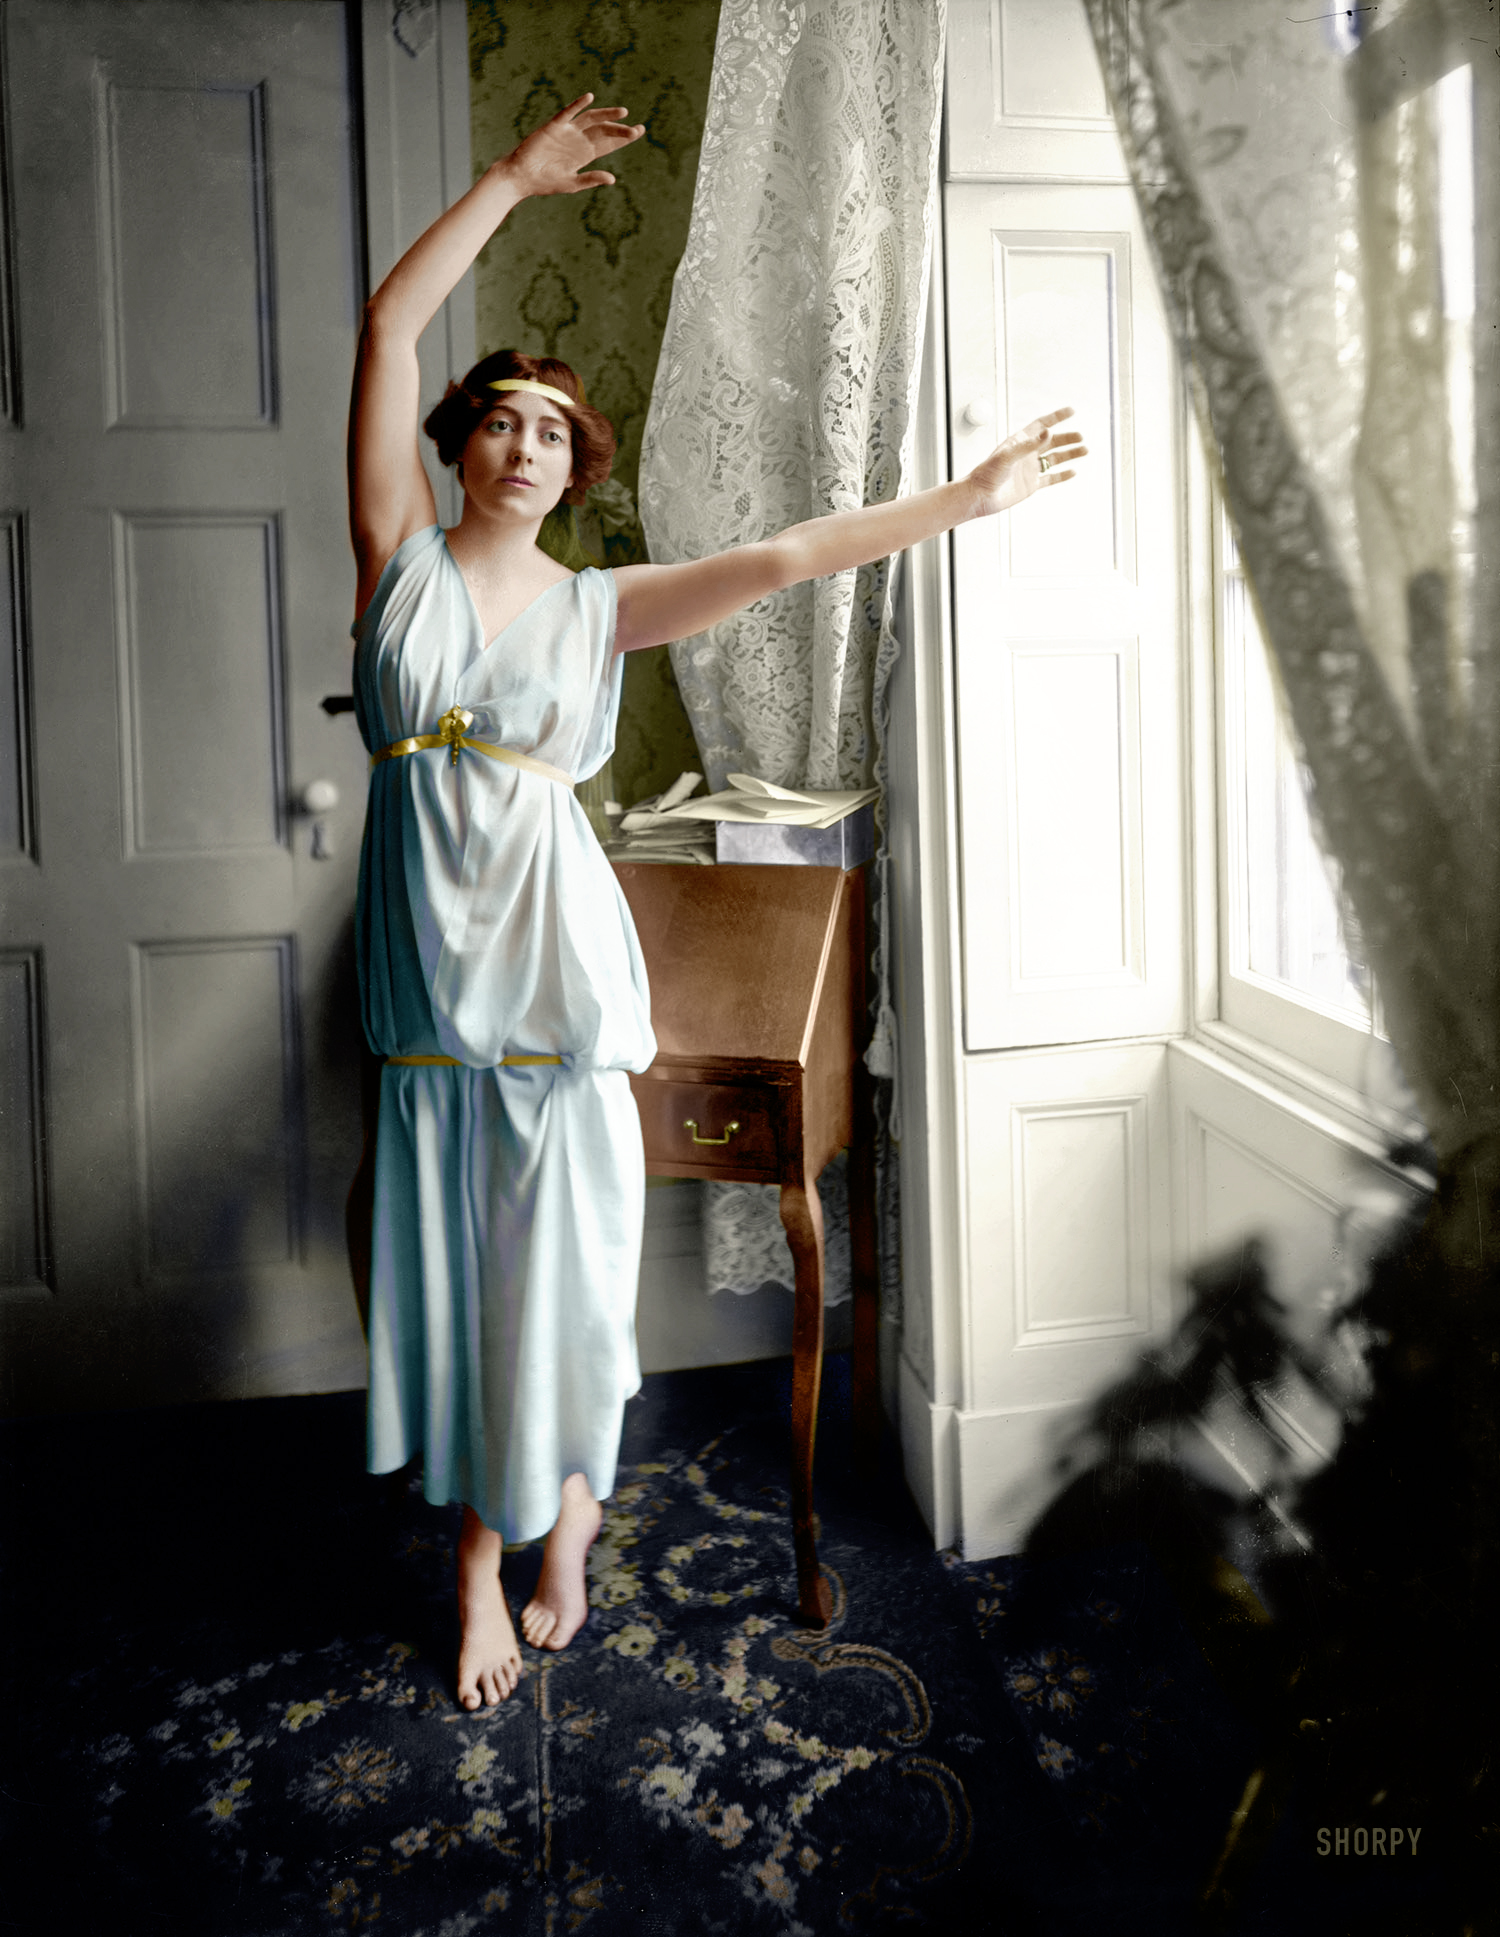 Colorized from this Shorpy original. Lady Richardson was a dancer and writer. She was outspoken on beauty and body image. No false modesty here. View full size.